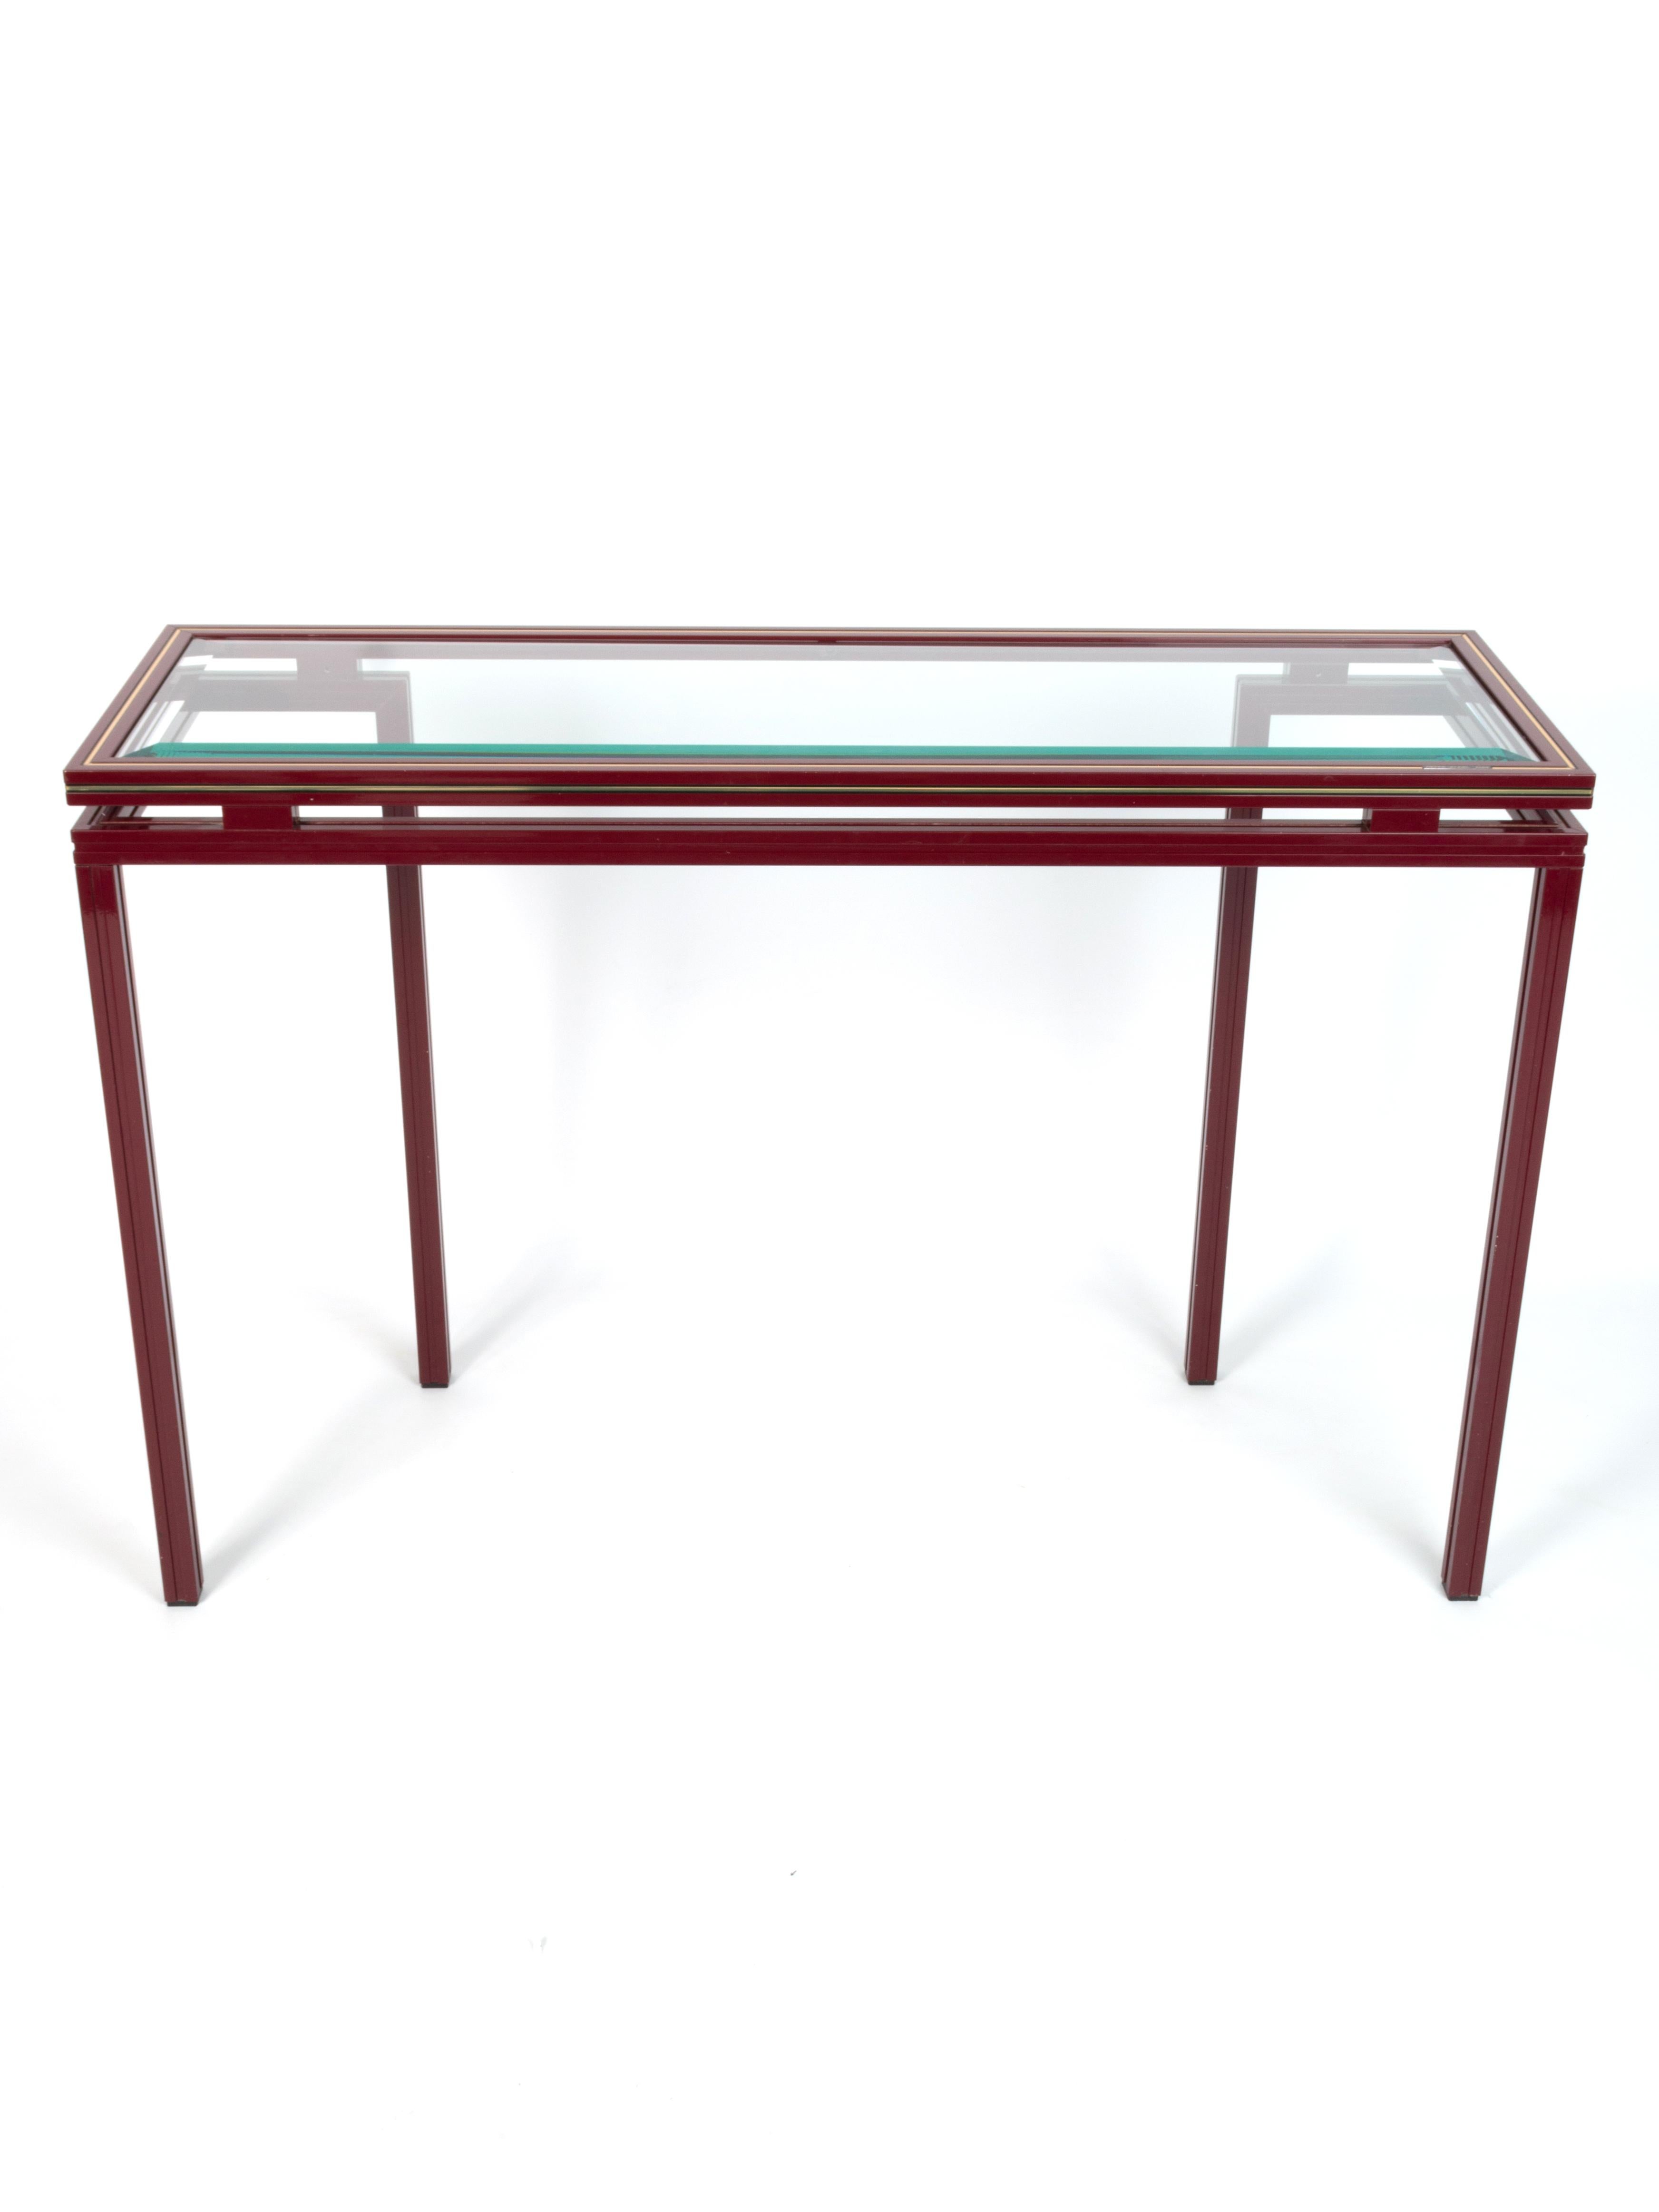 20th Century French 1970s Glass & Lacquer Console Table & Wall Mirror by Pierre Vandel, Paris For Sale